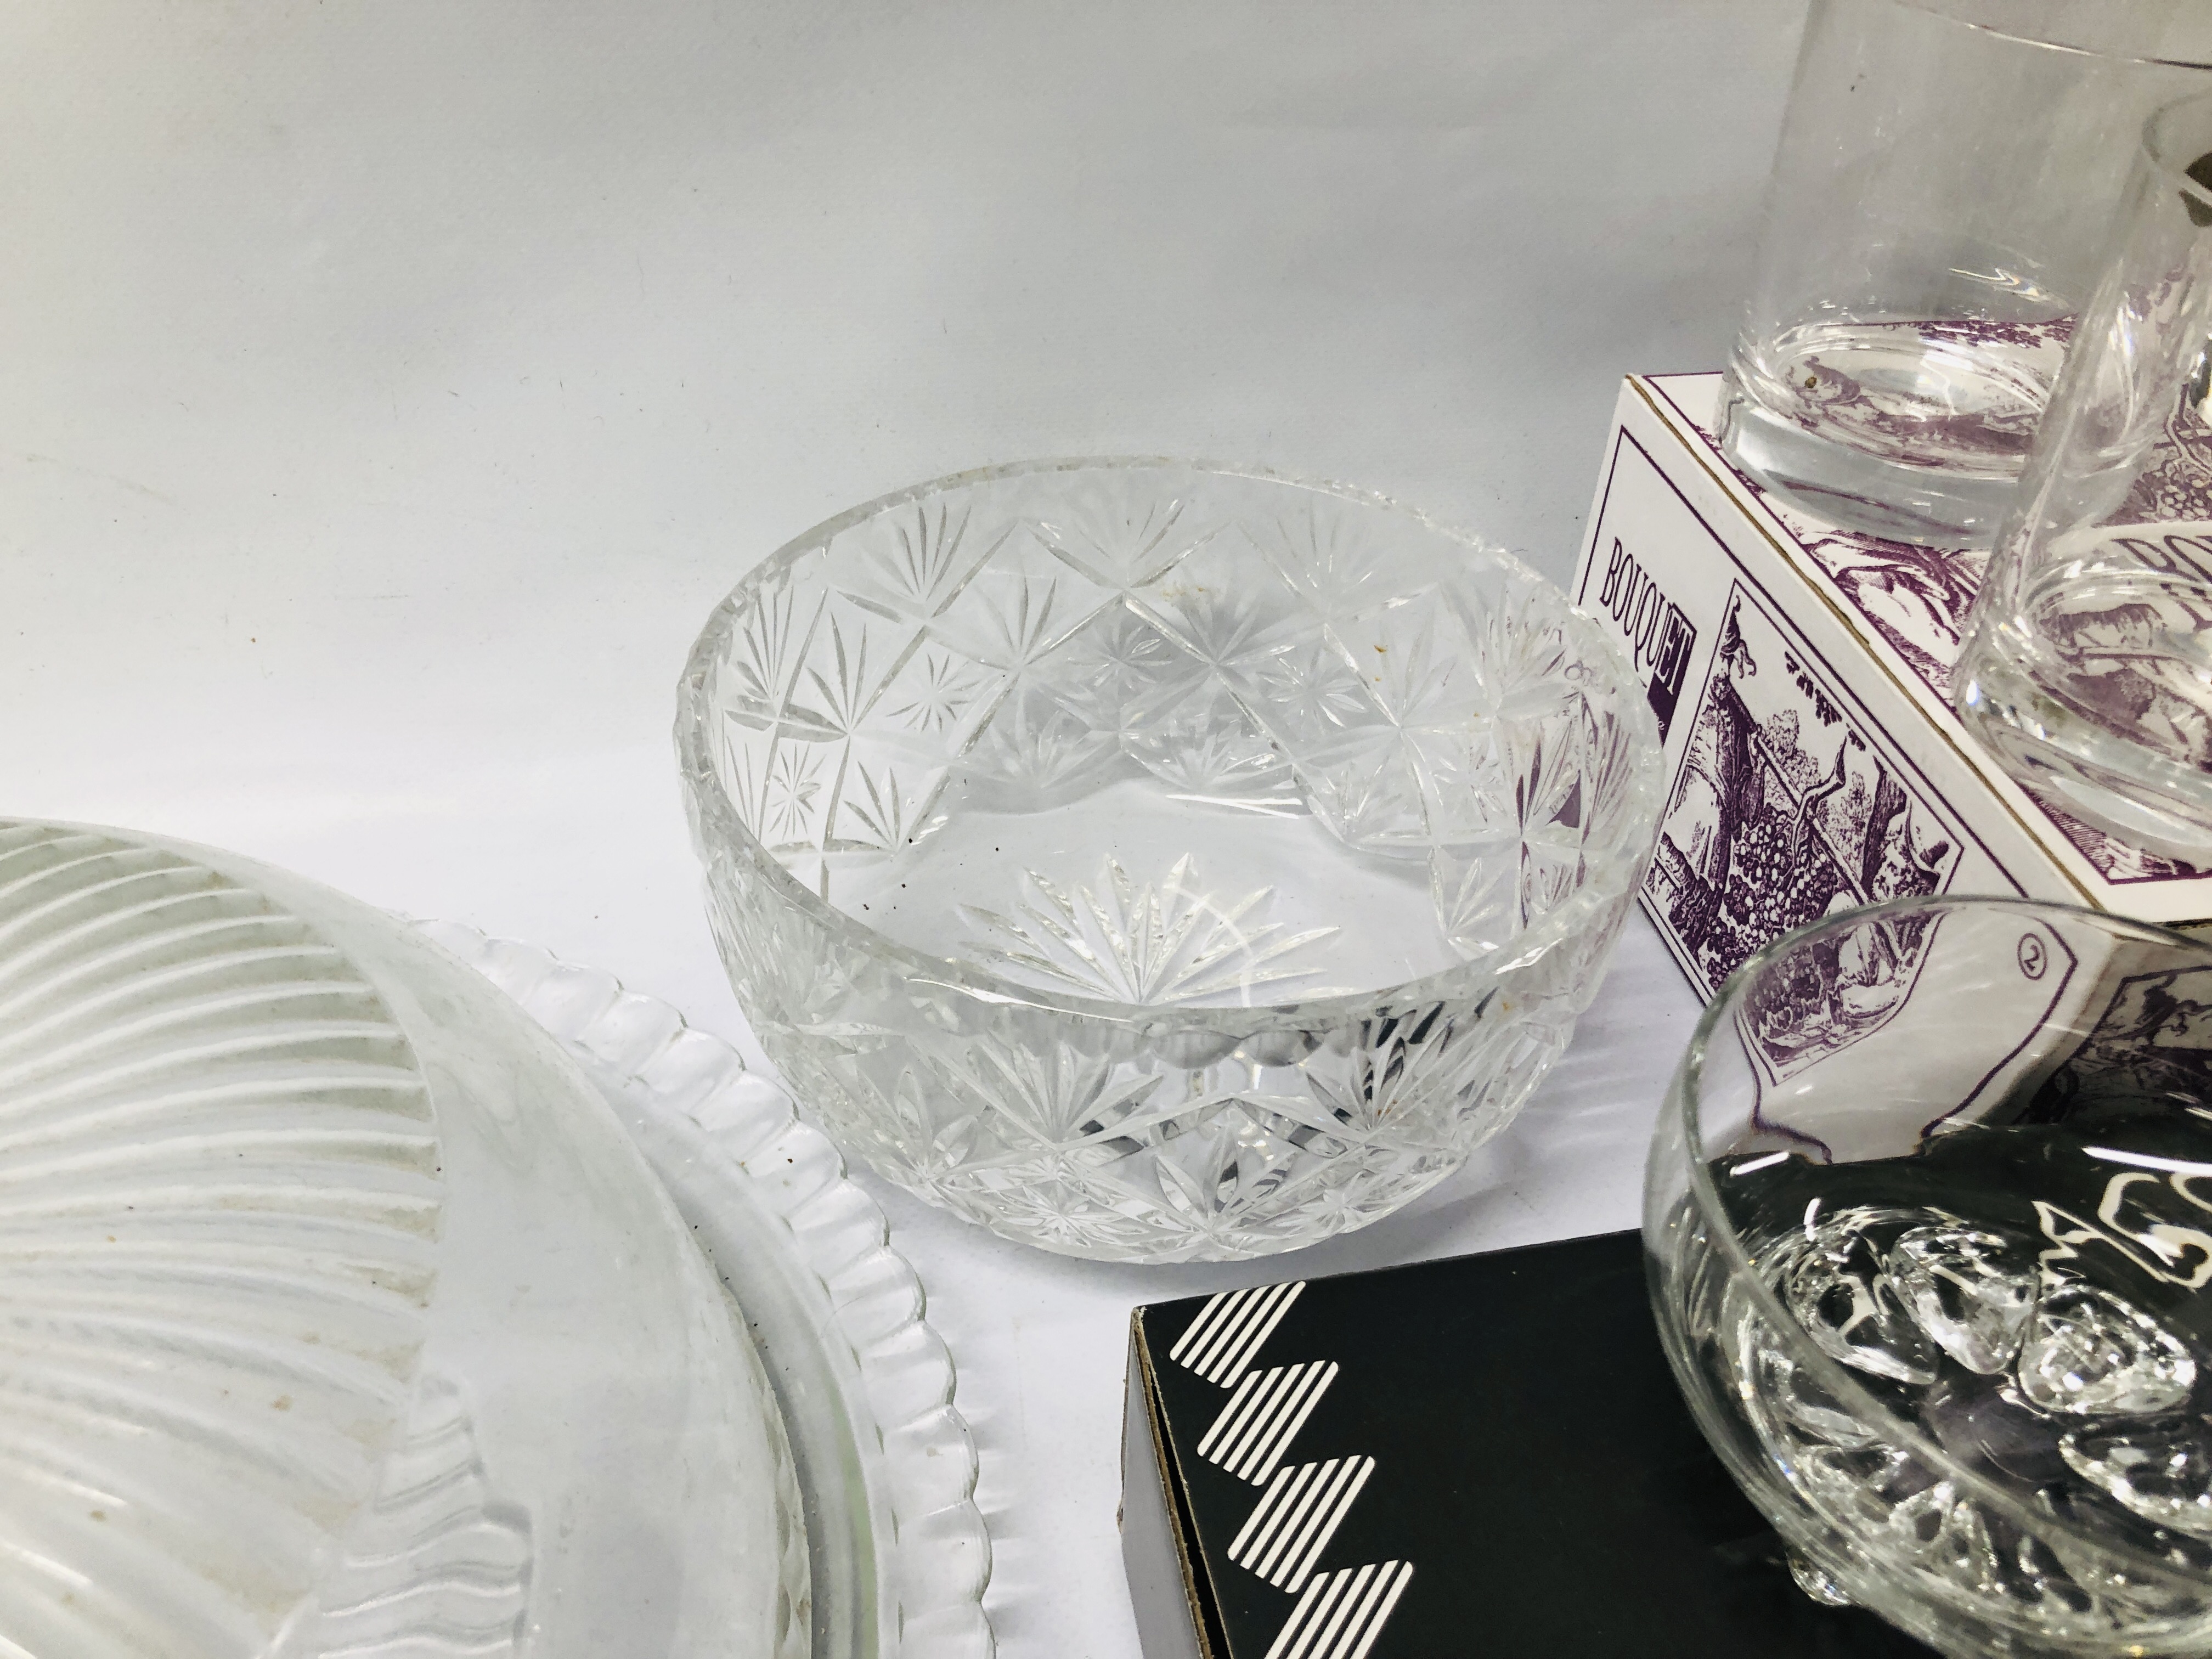 DECORATIVE GLASS CAKE PLATE AND COVER, GLASS CORONATION PLATE, - Image 7 of 7